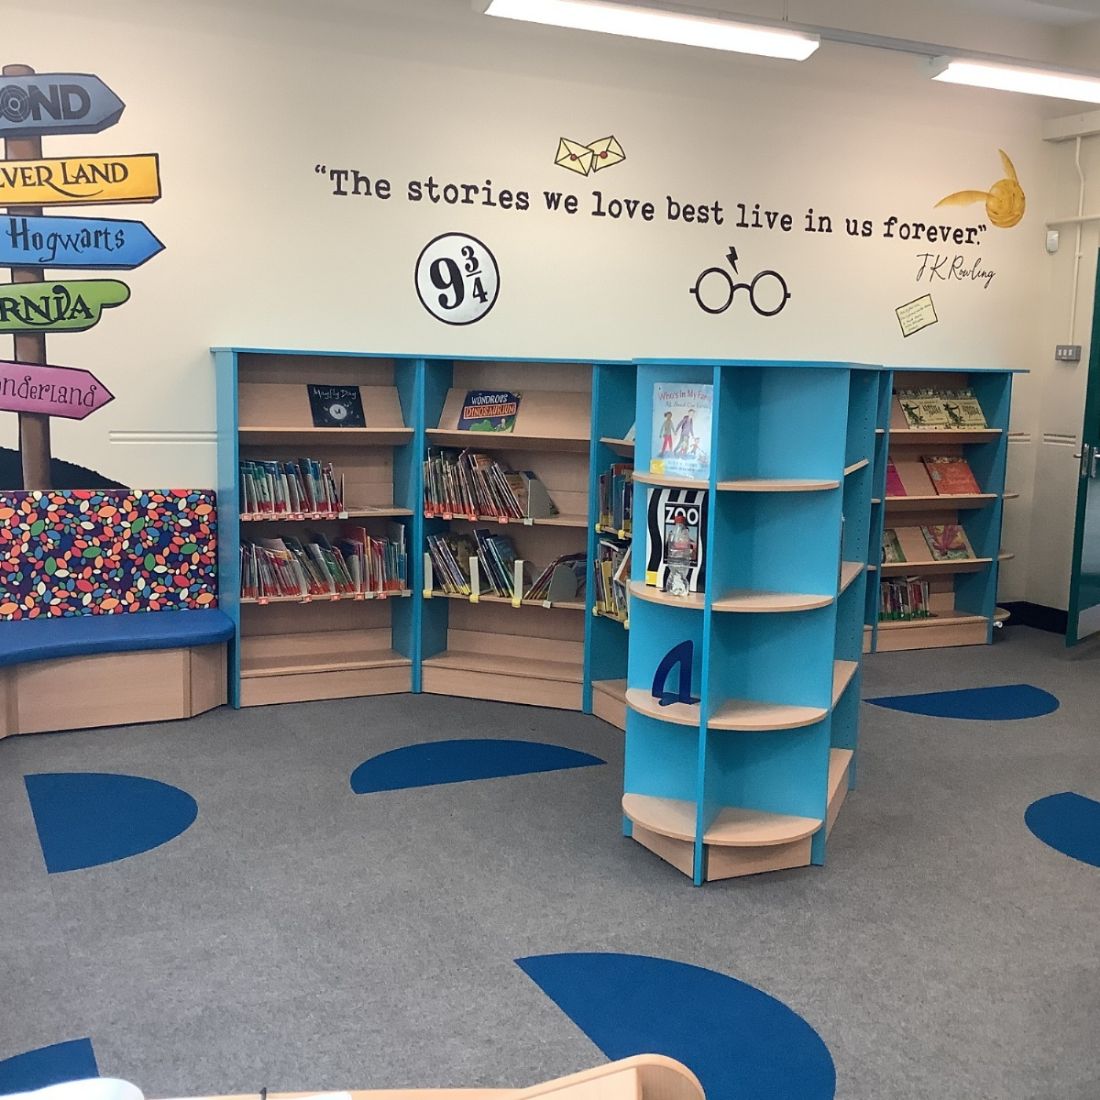 Our bright and colourful library